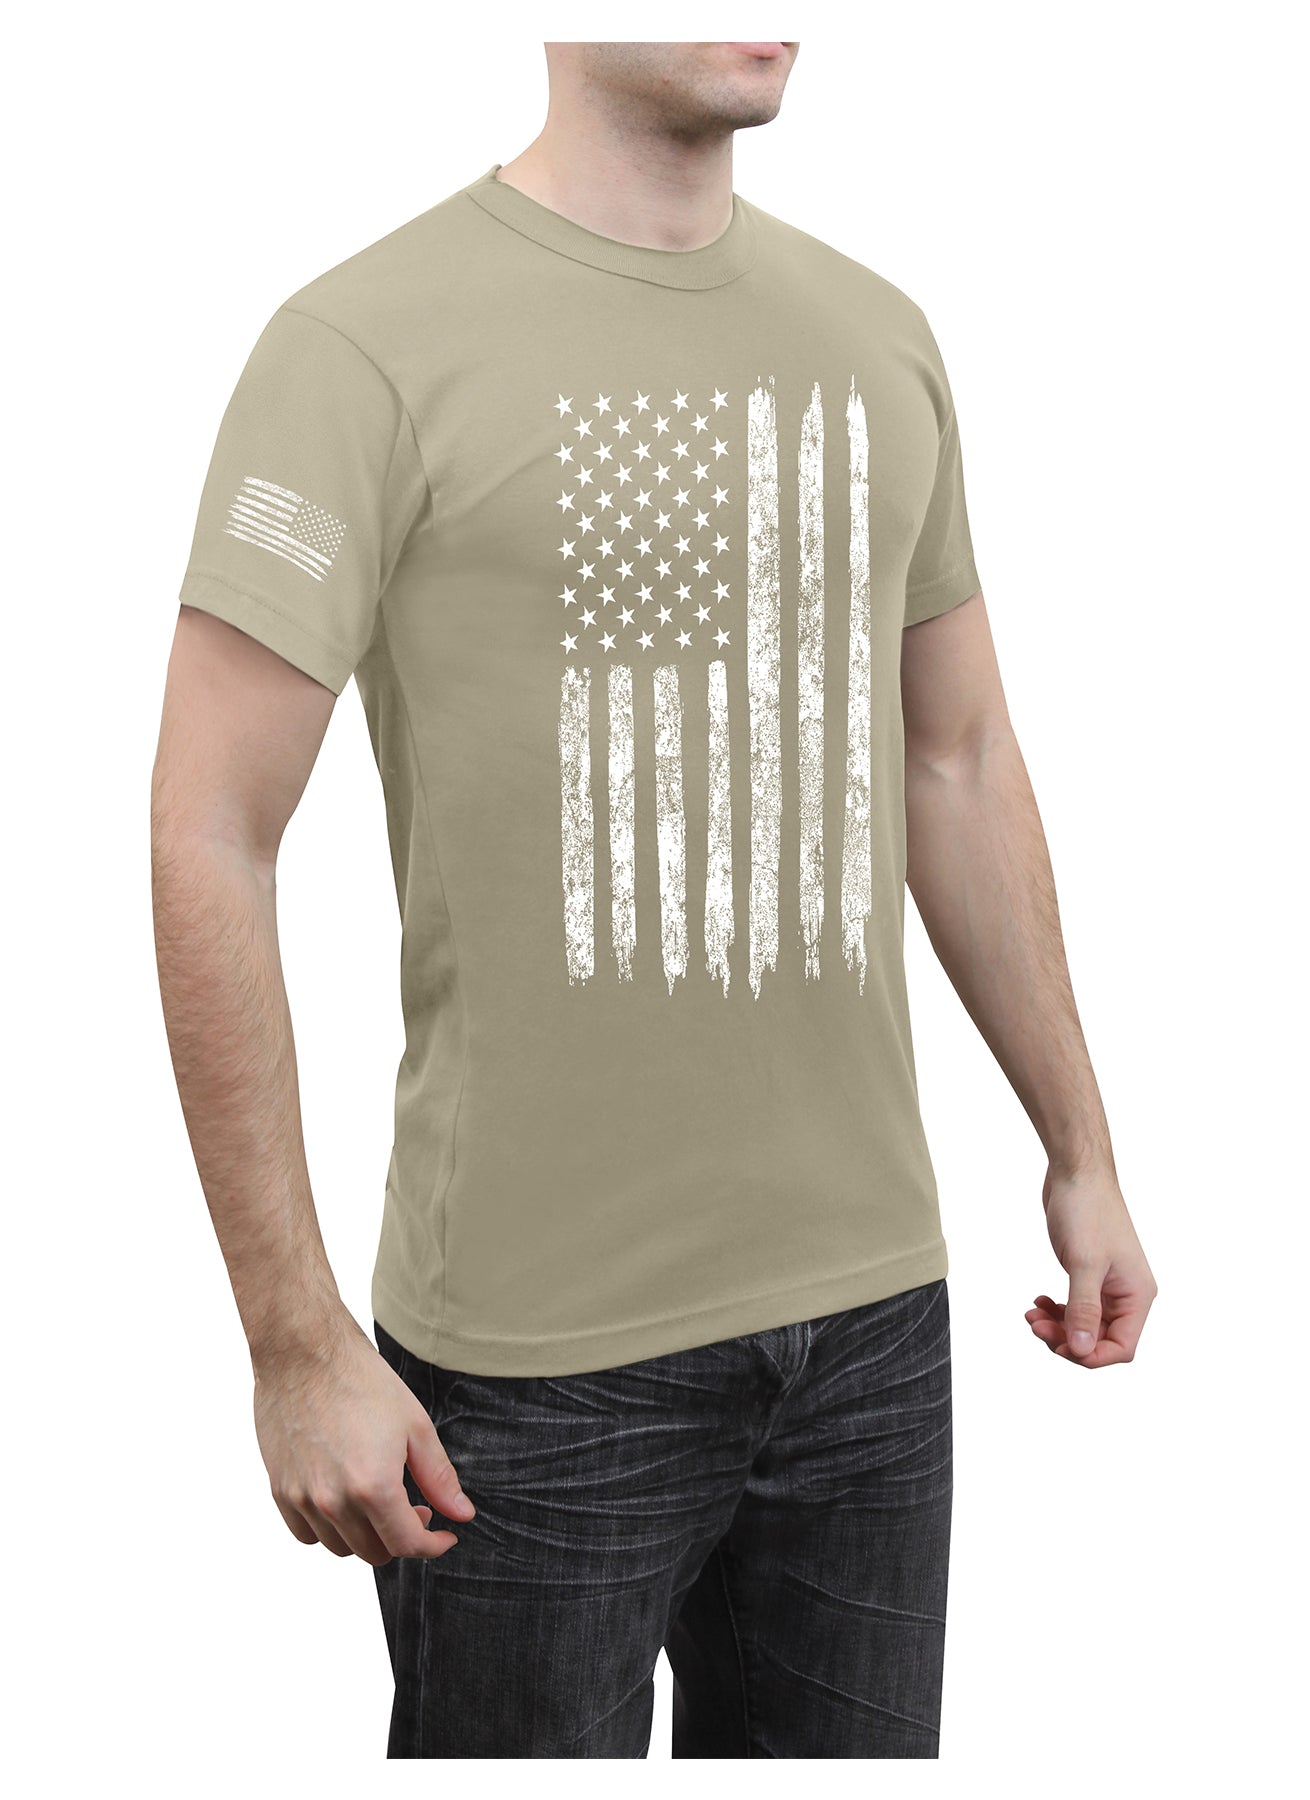 T-Shirt: Distressed US Flag Athletic Fit